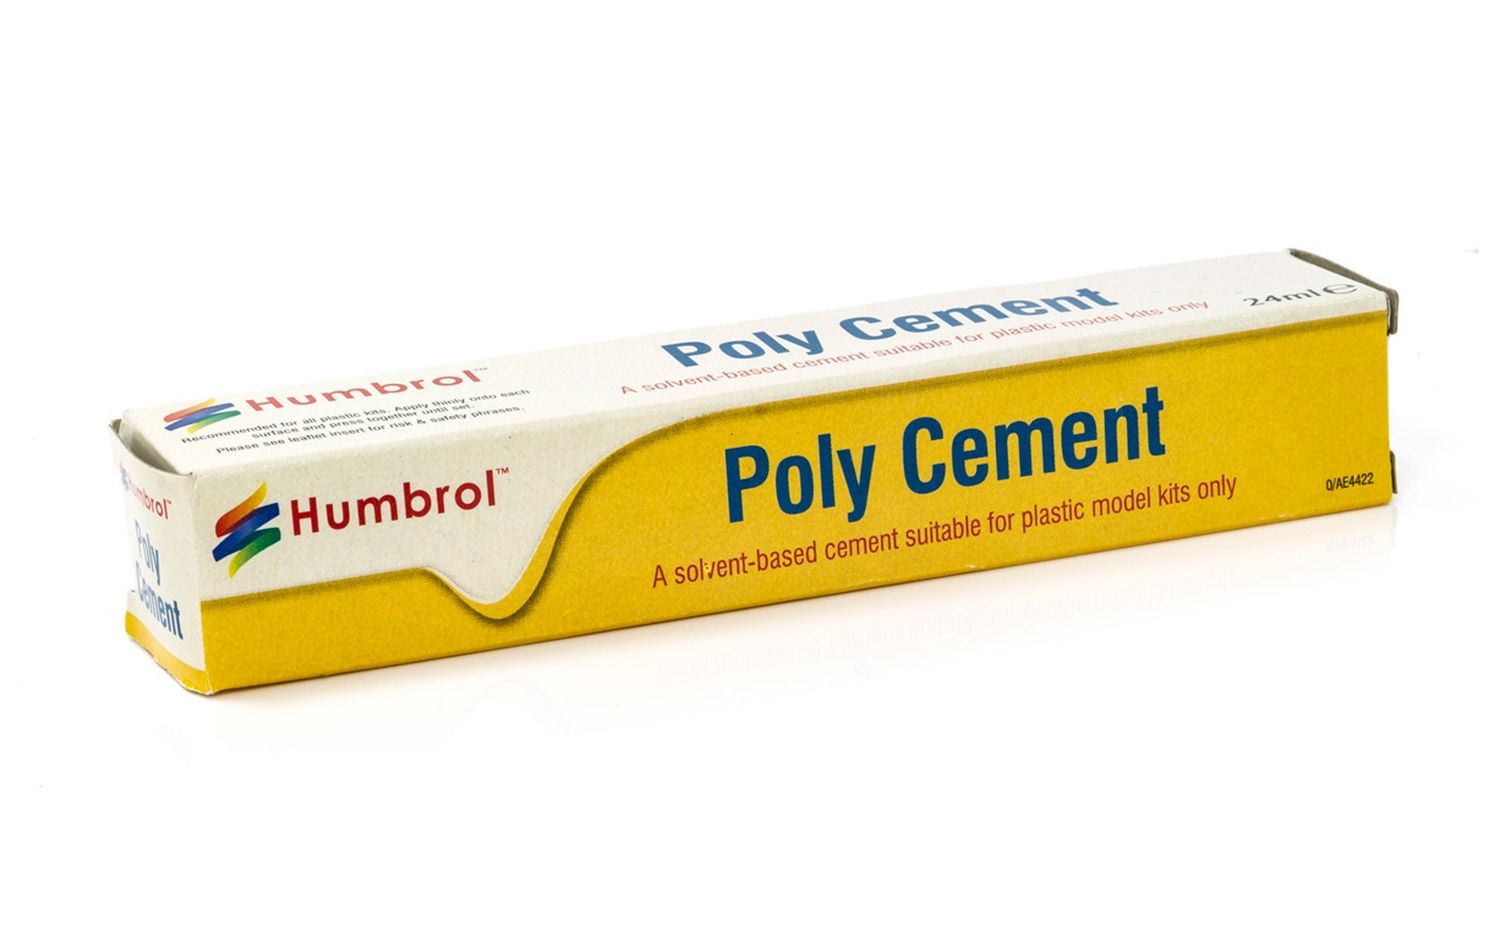 AE4422 Poly Cement Large (Tube)